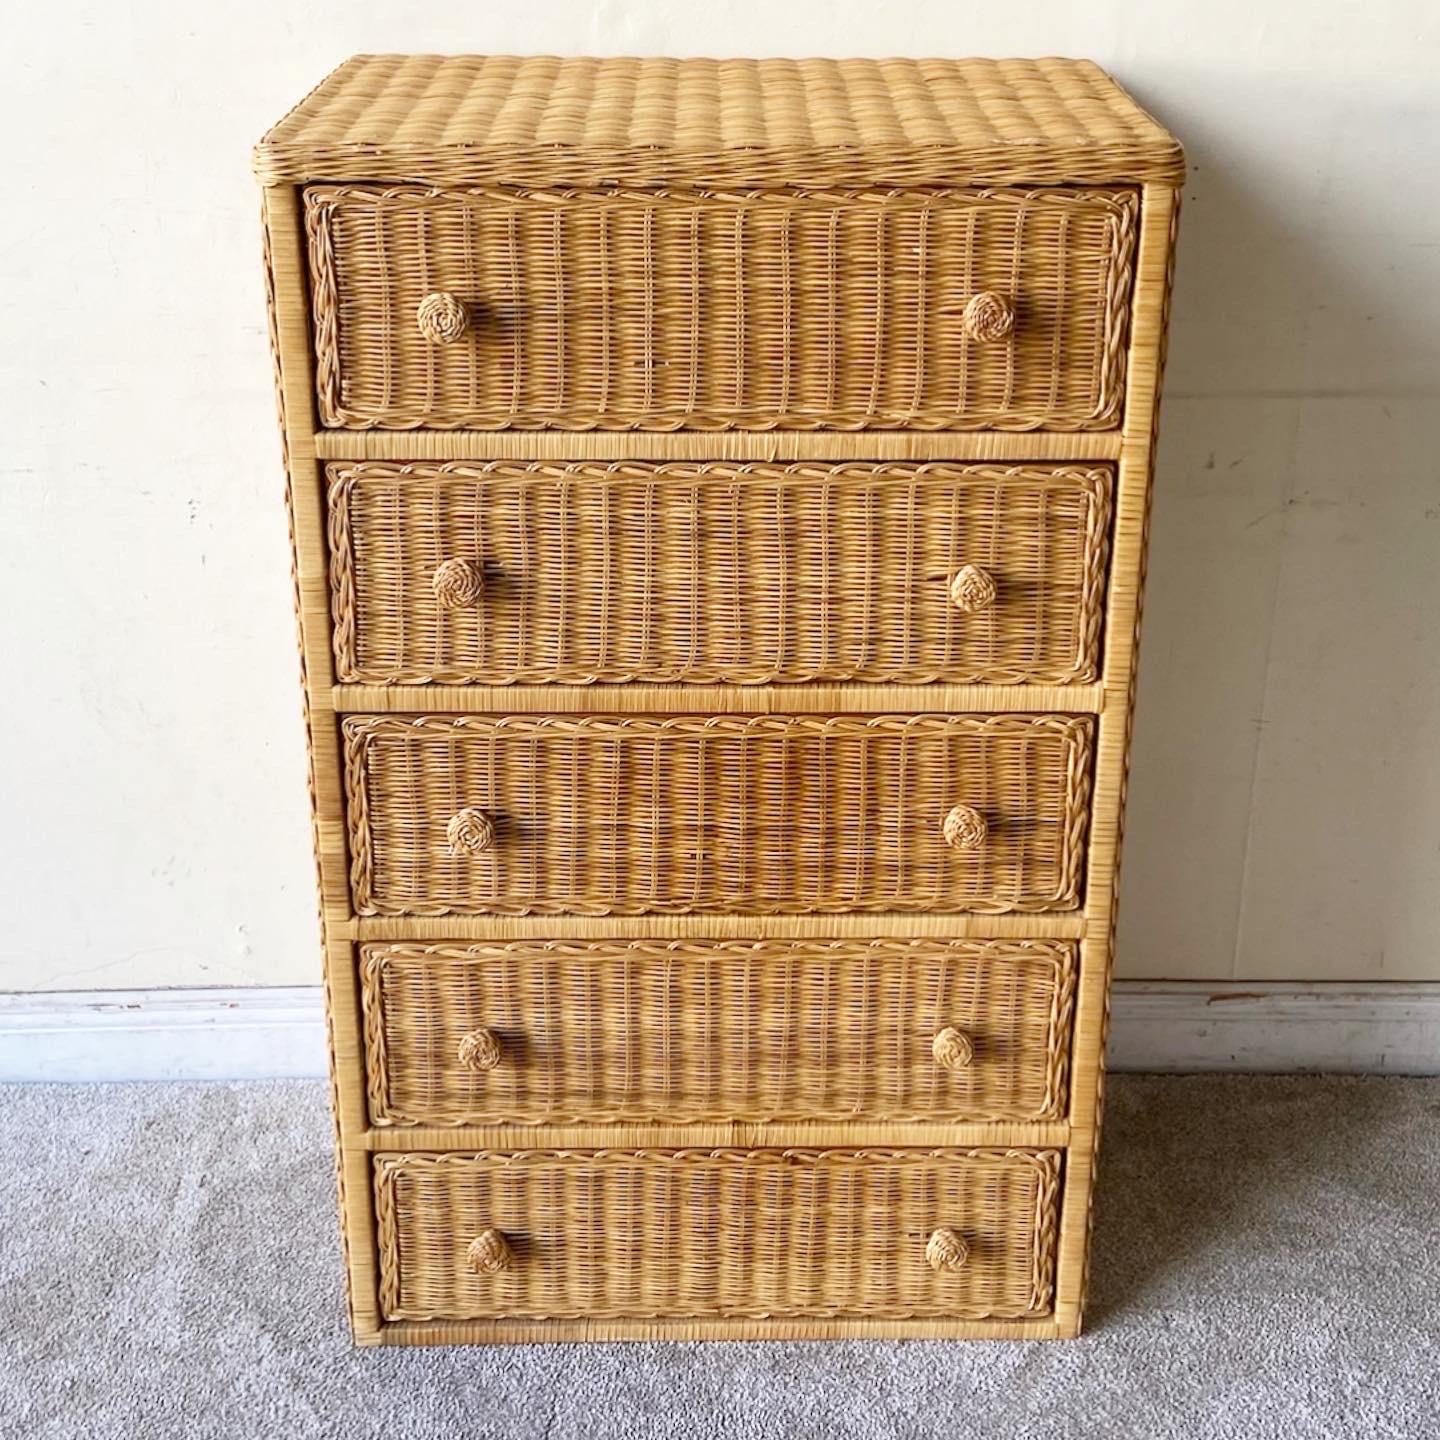 Amazing vintage bohemian Highboy dresser. Features a rattan frame with wicker thought the frames and drawer faces of the dresser.
